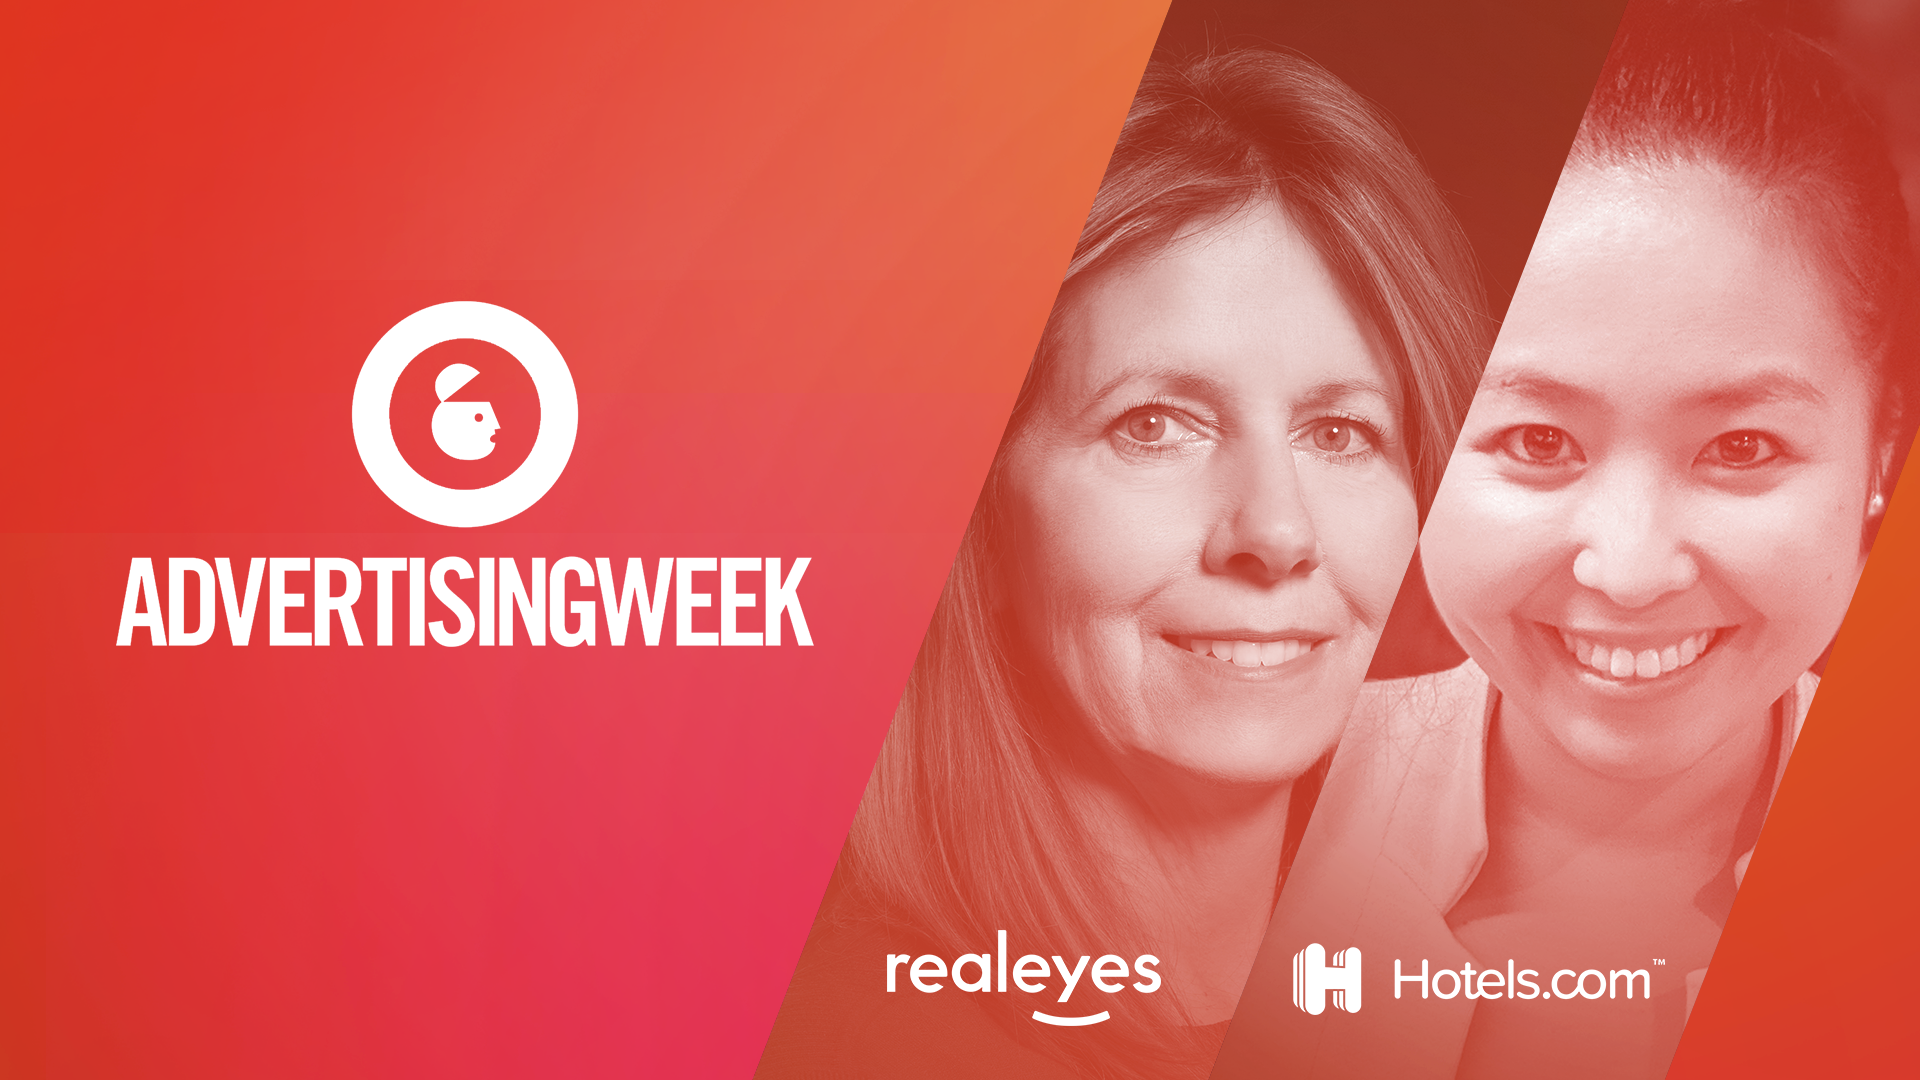 Realeyes And Hotels.com To Show How Brands Are Using AI To Raise Creative Bar At #AWNewYork